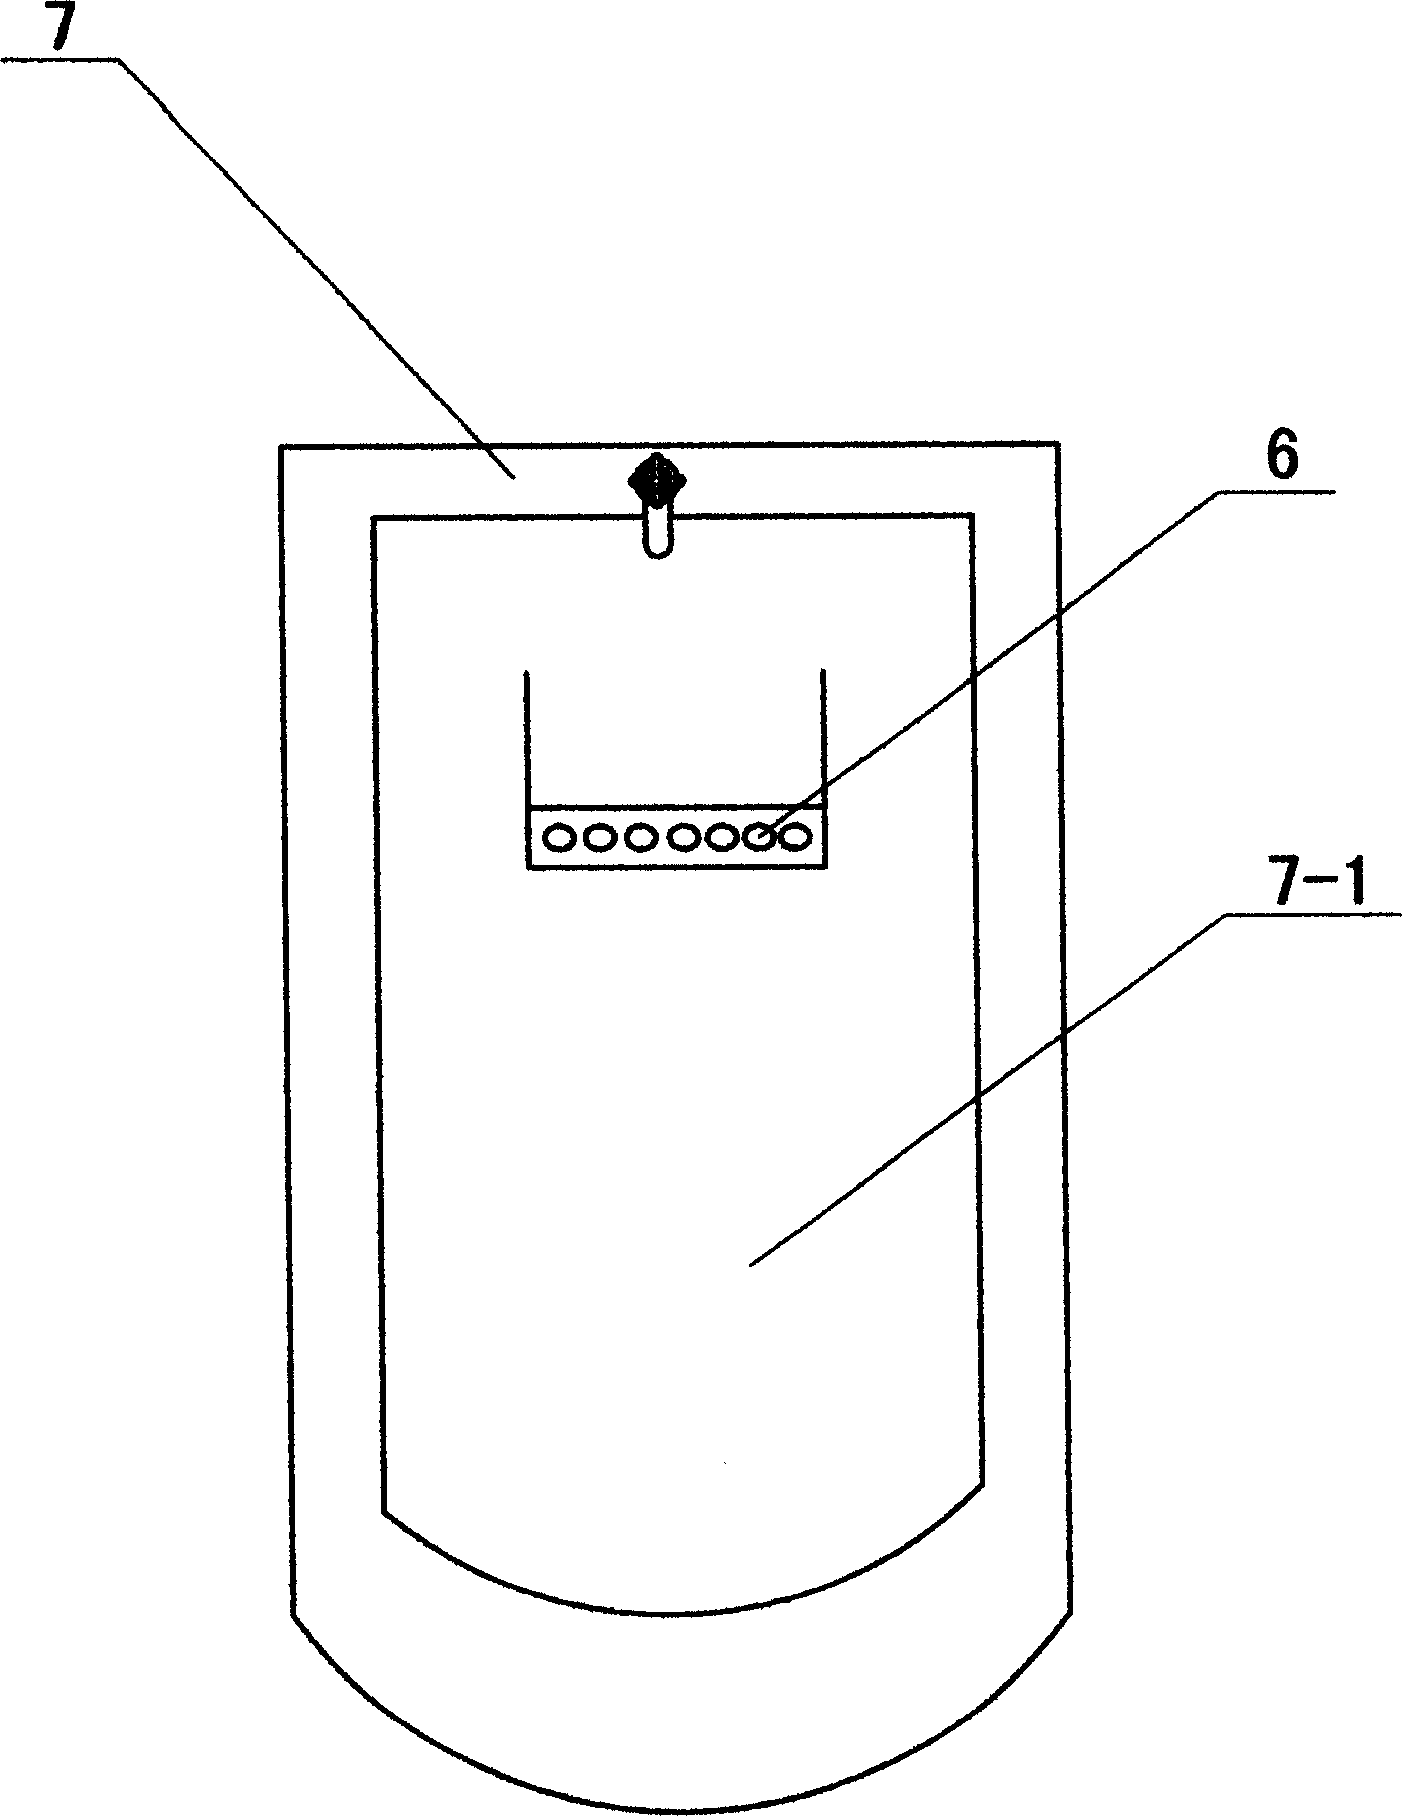 An ocean wave type water current circulating mode for bathtub